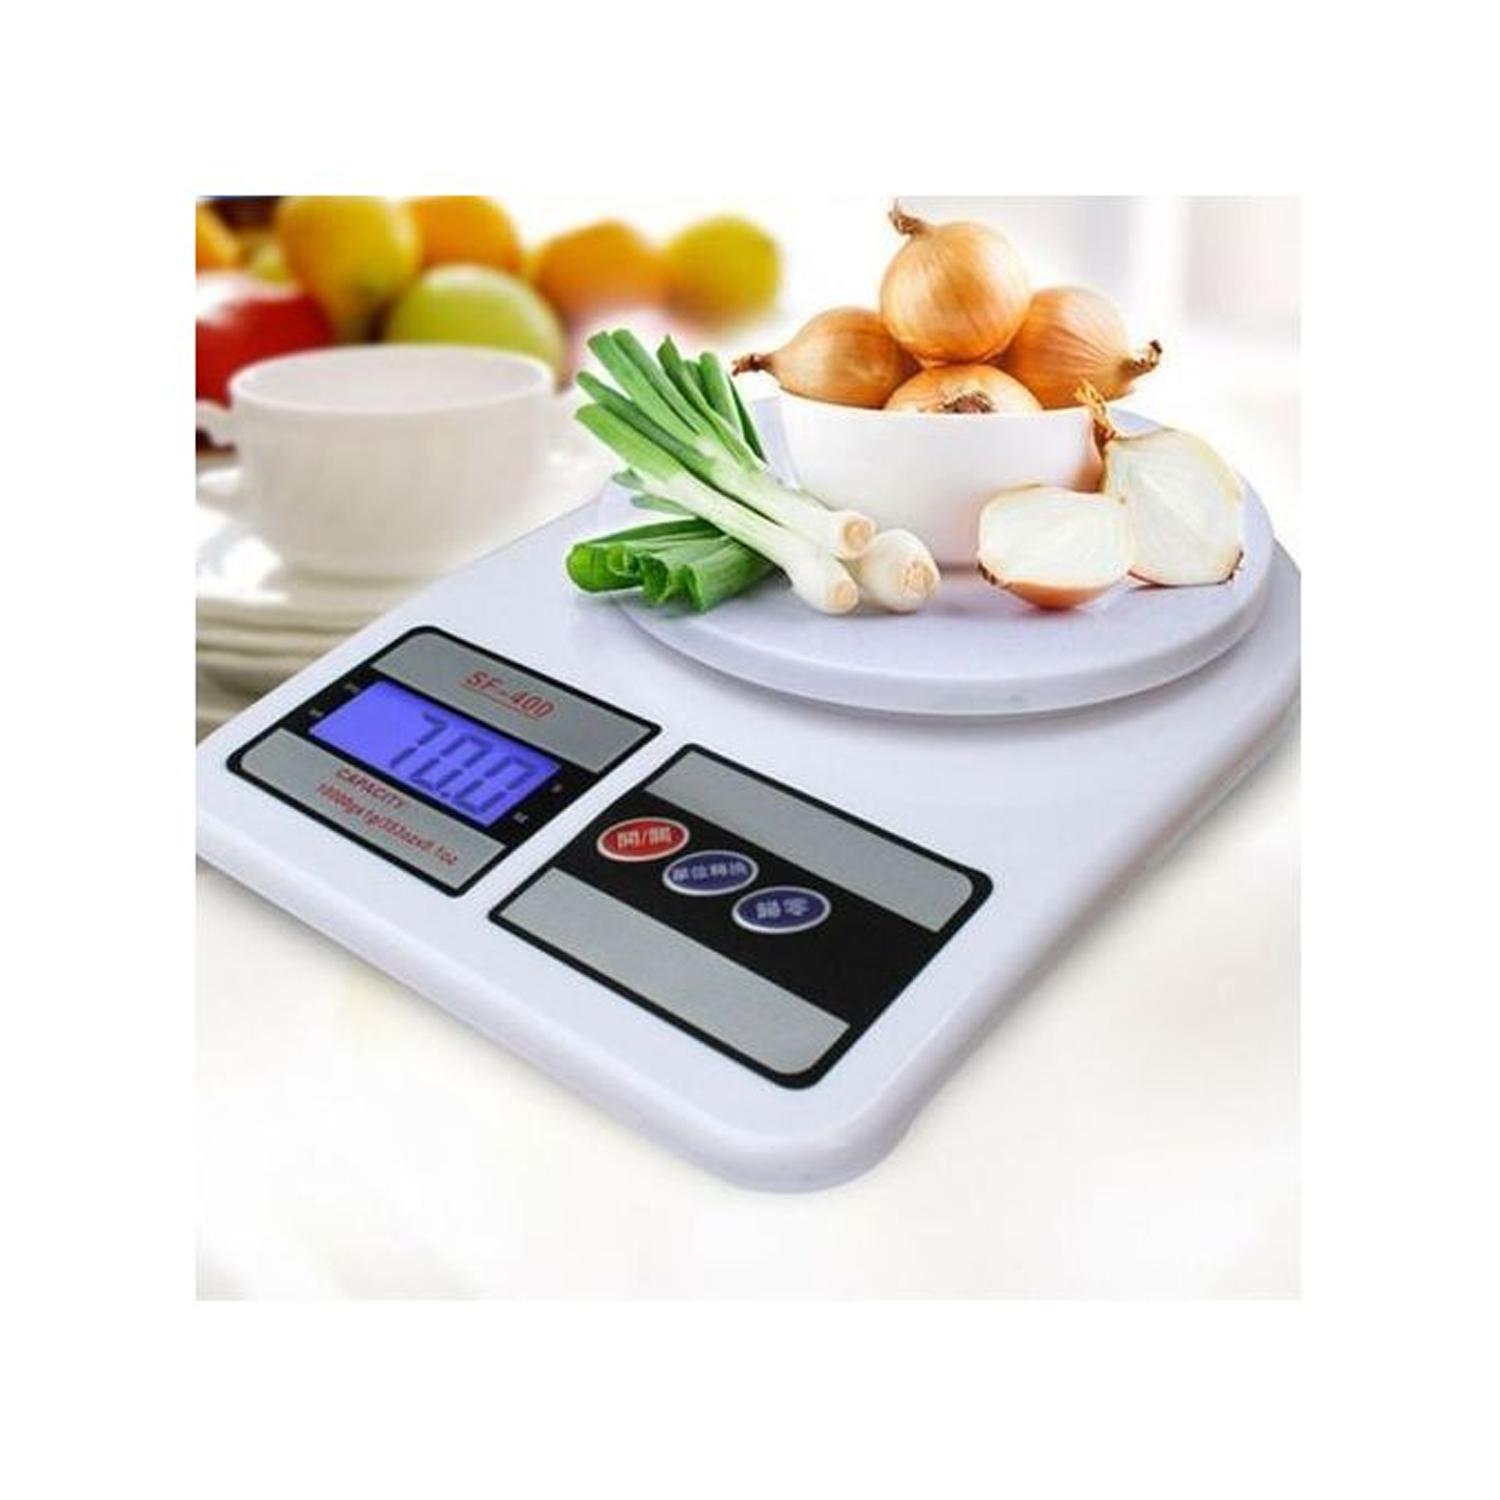 SF 400 10KG WEIGHING SCALE